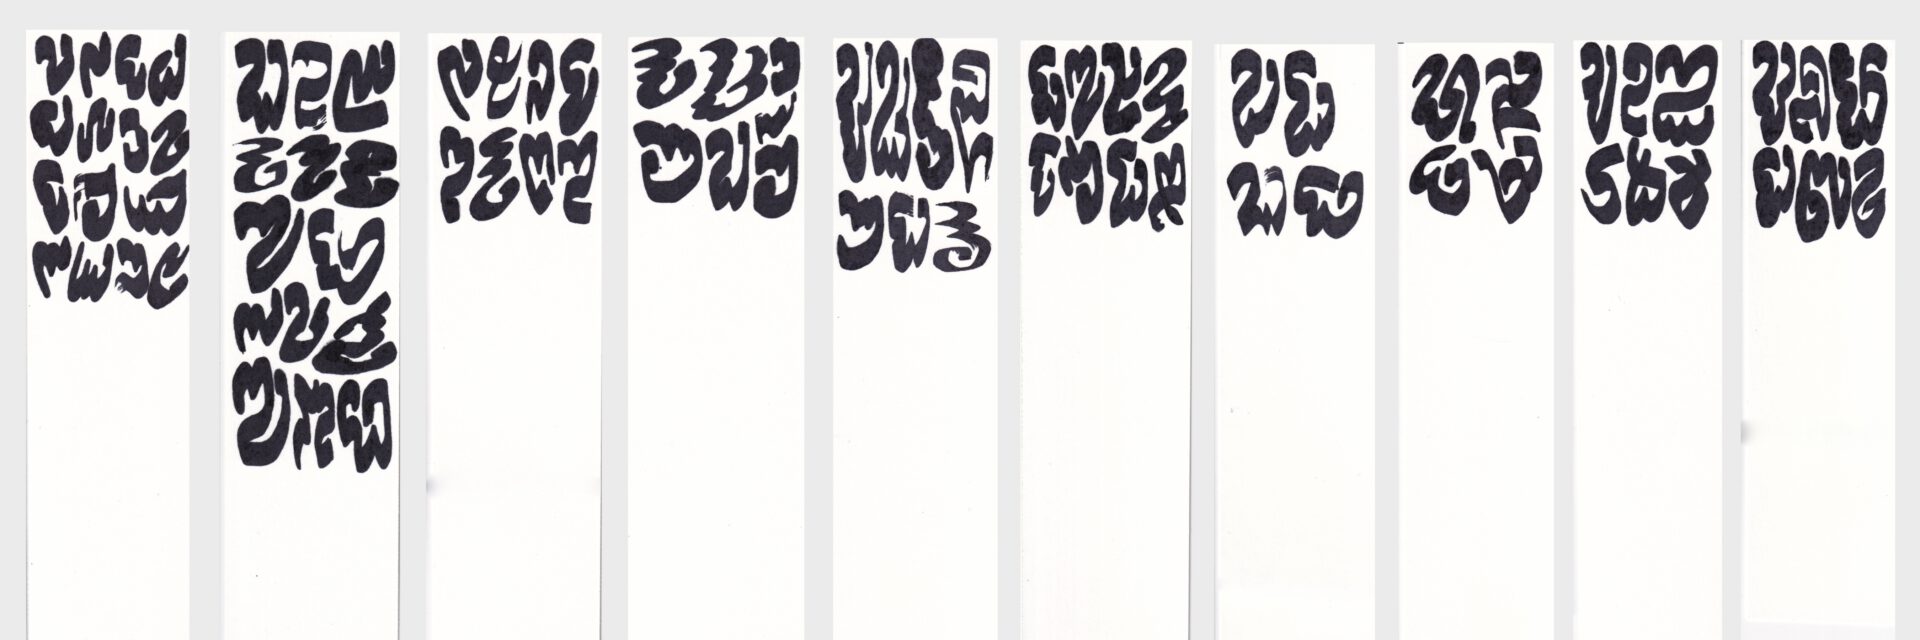 Bookmark, black and red ink on white cardboard, 2022